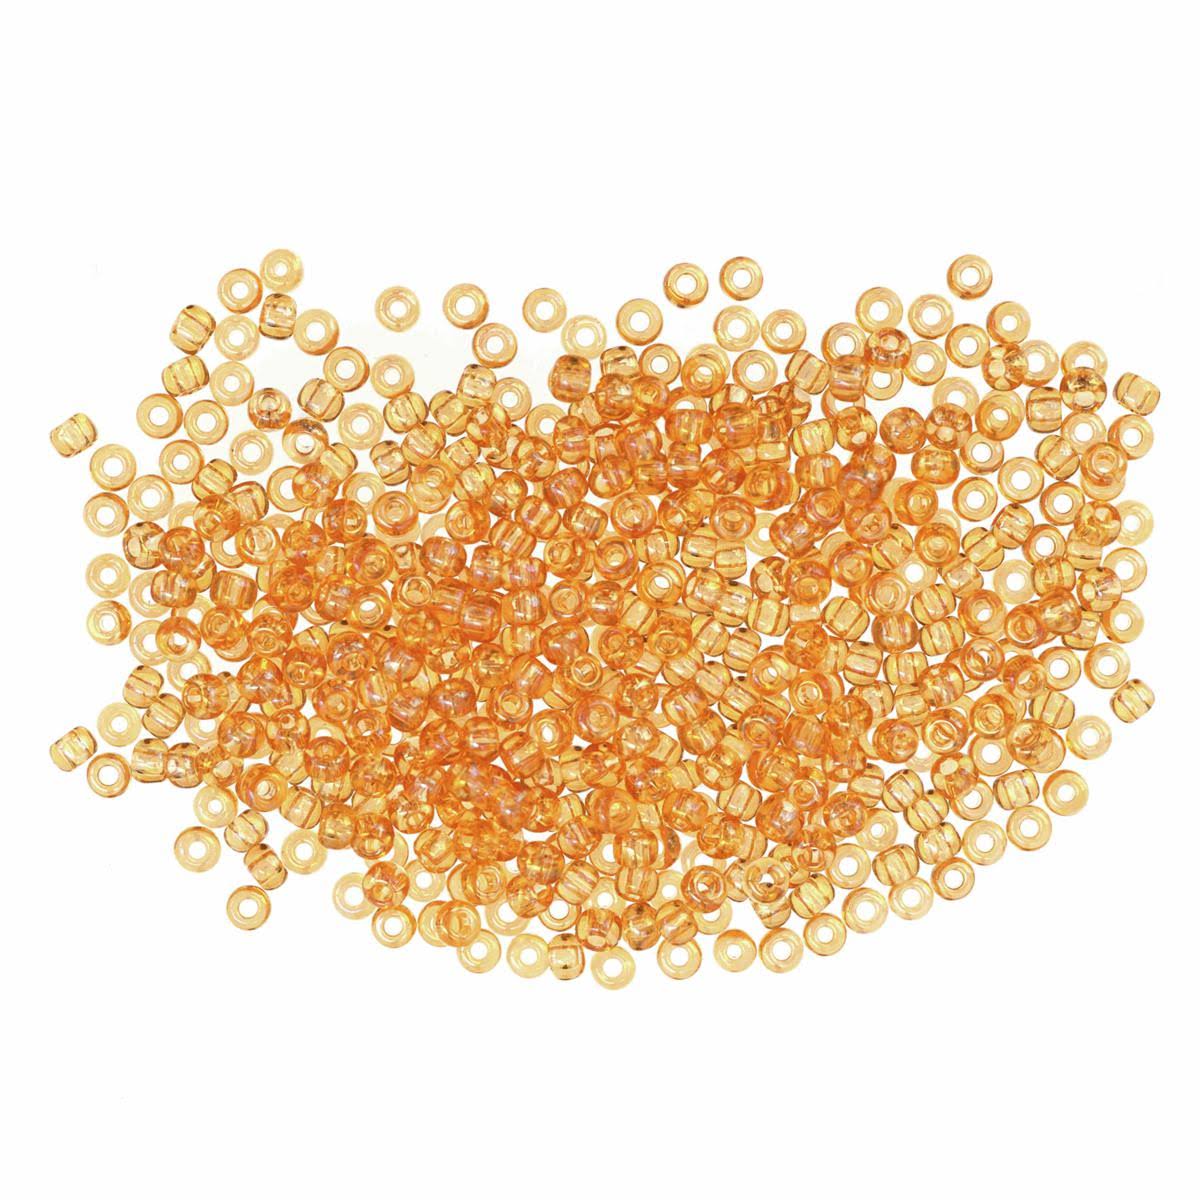 Mill Hill Crystal Honey Seed Beads Size 11